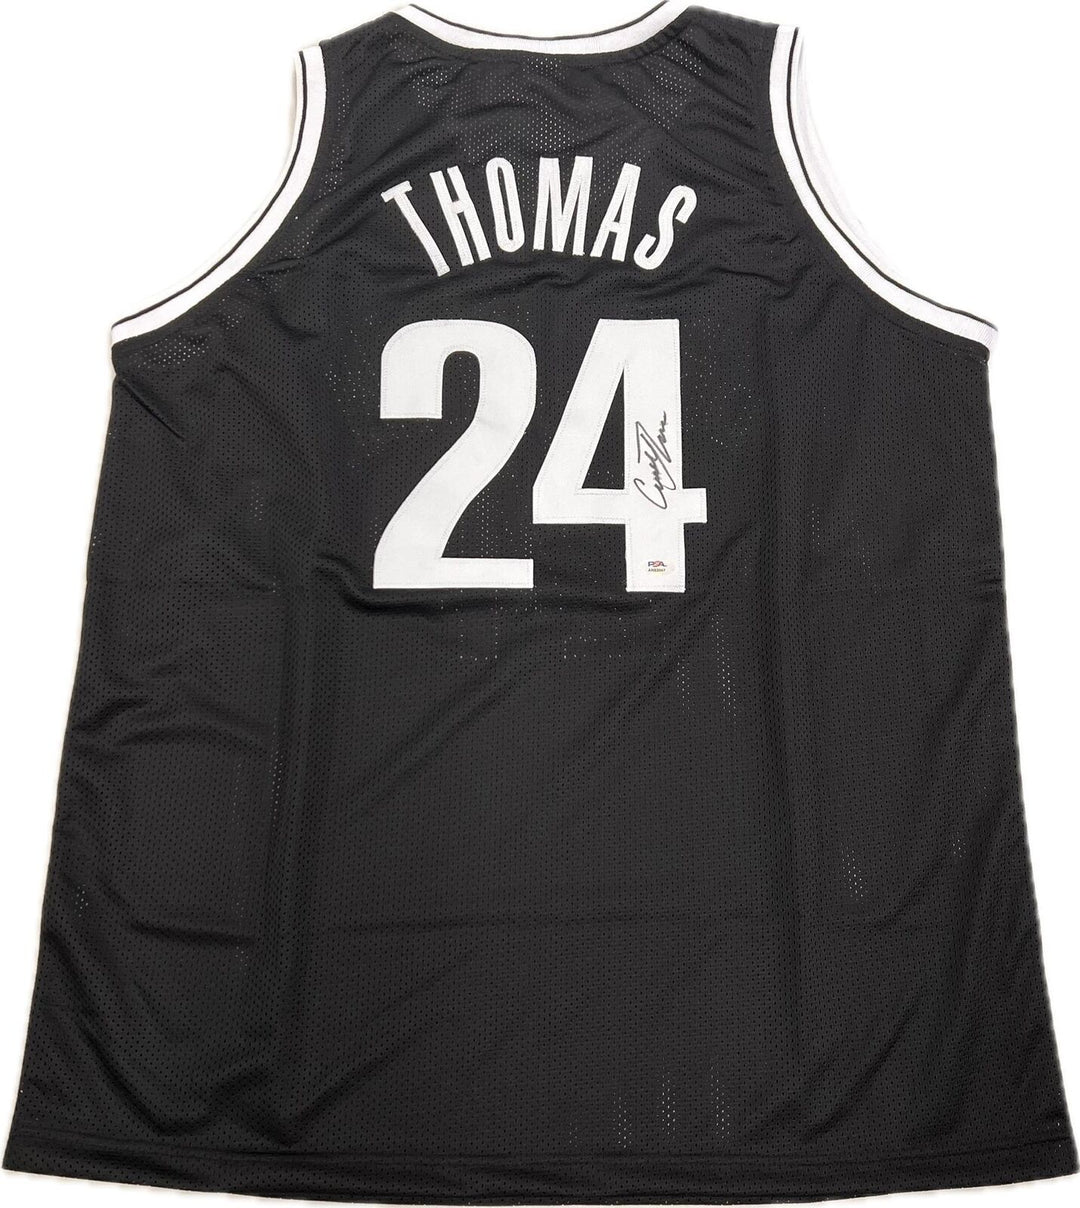 Cam Thomas Signed Jersey PSA/DNA Brooklyn Nets Autographed Image 1